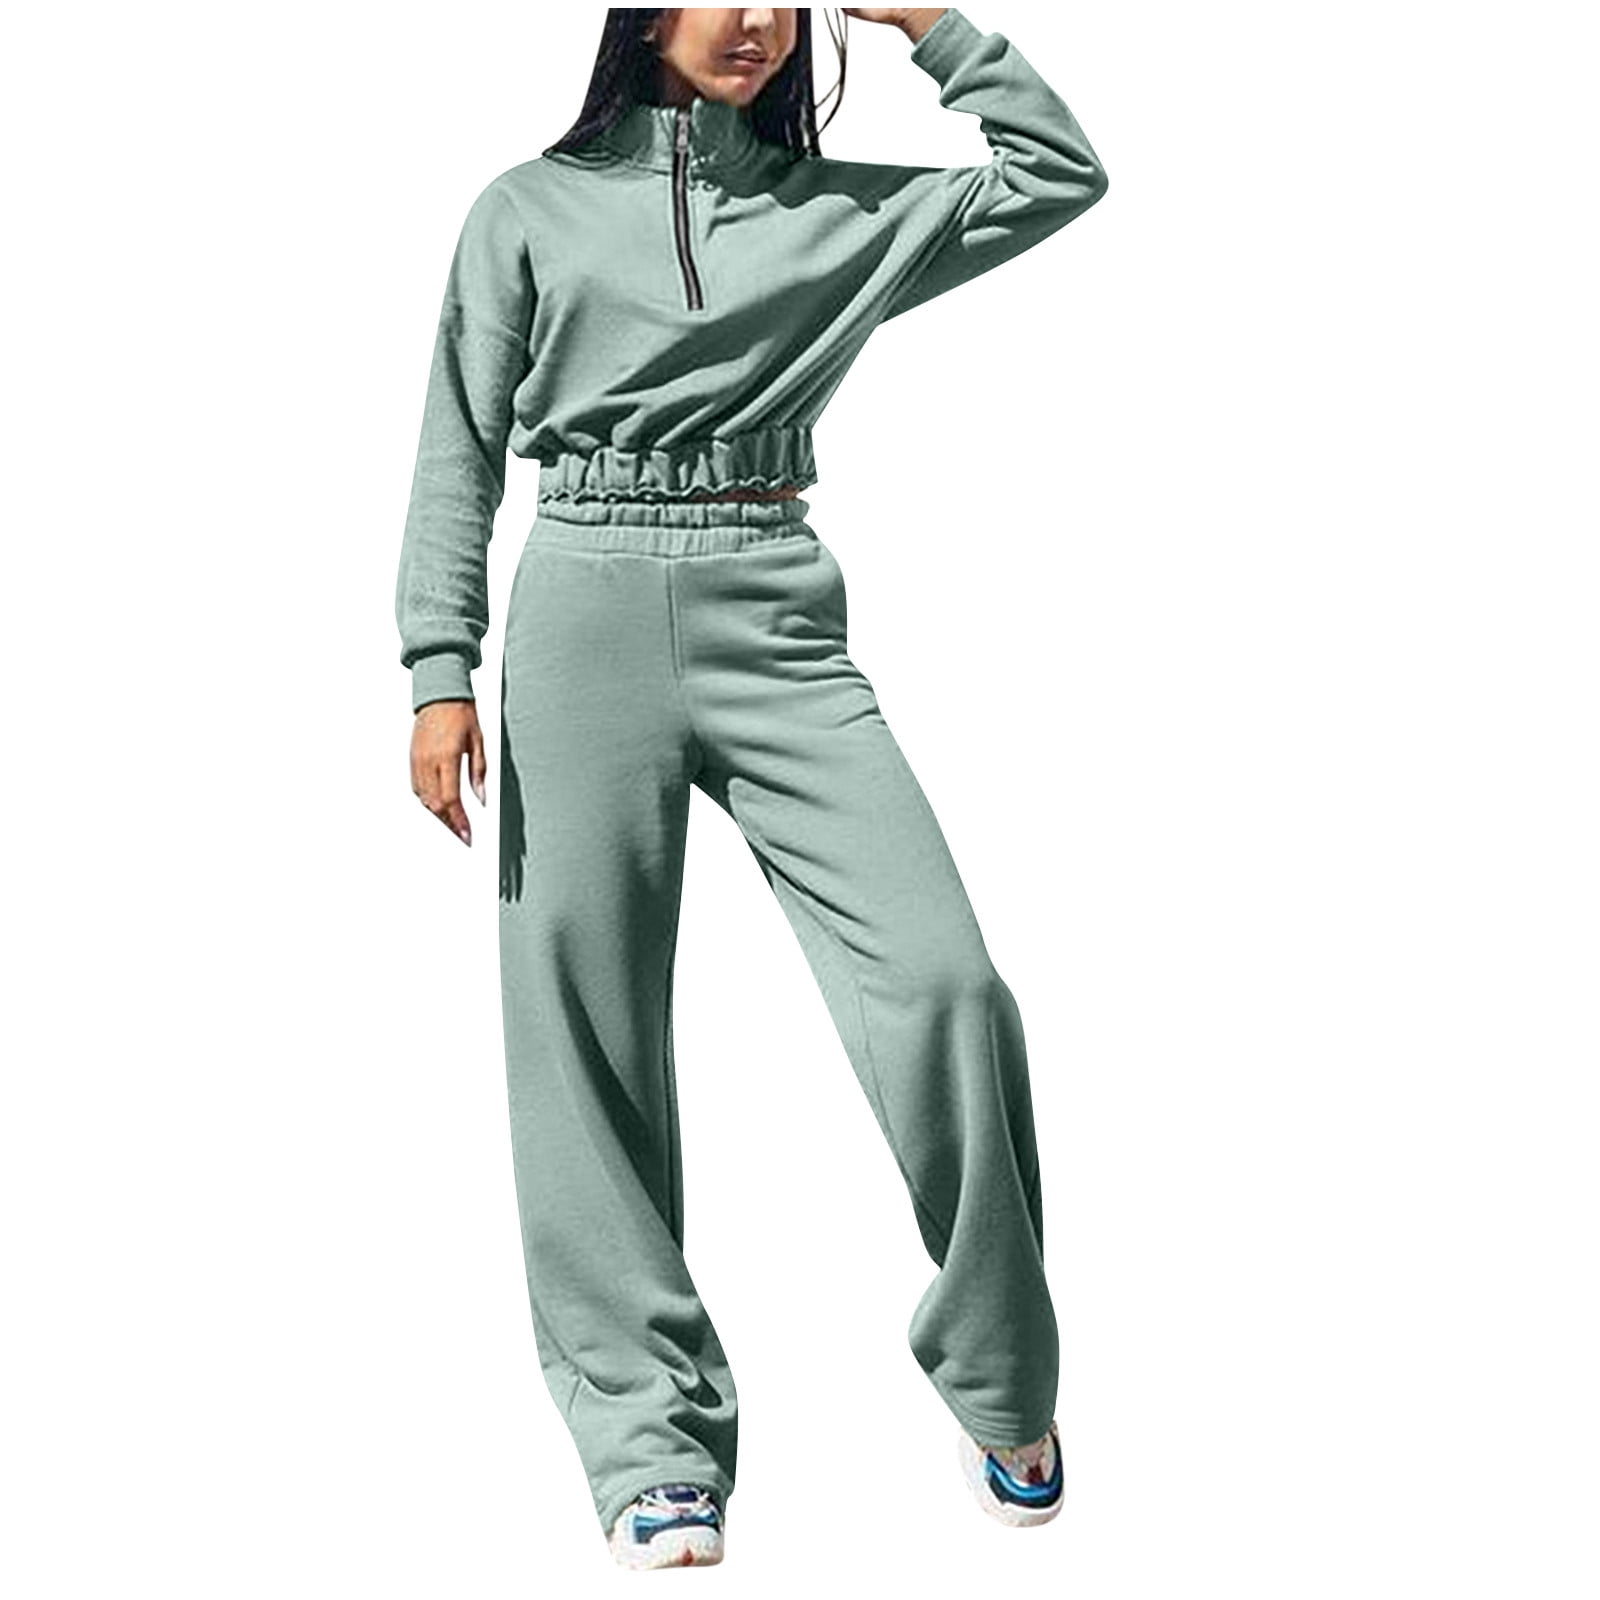 RQYYD Jogging Suits for Women 2 Piece Sweatsuit Outfits Long Sleeve ...